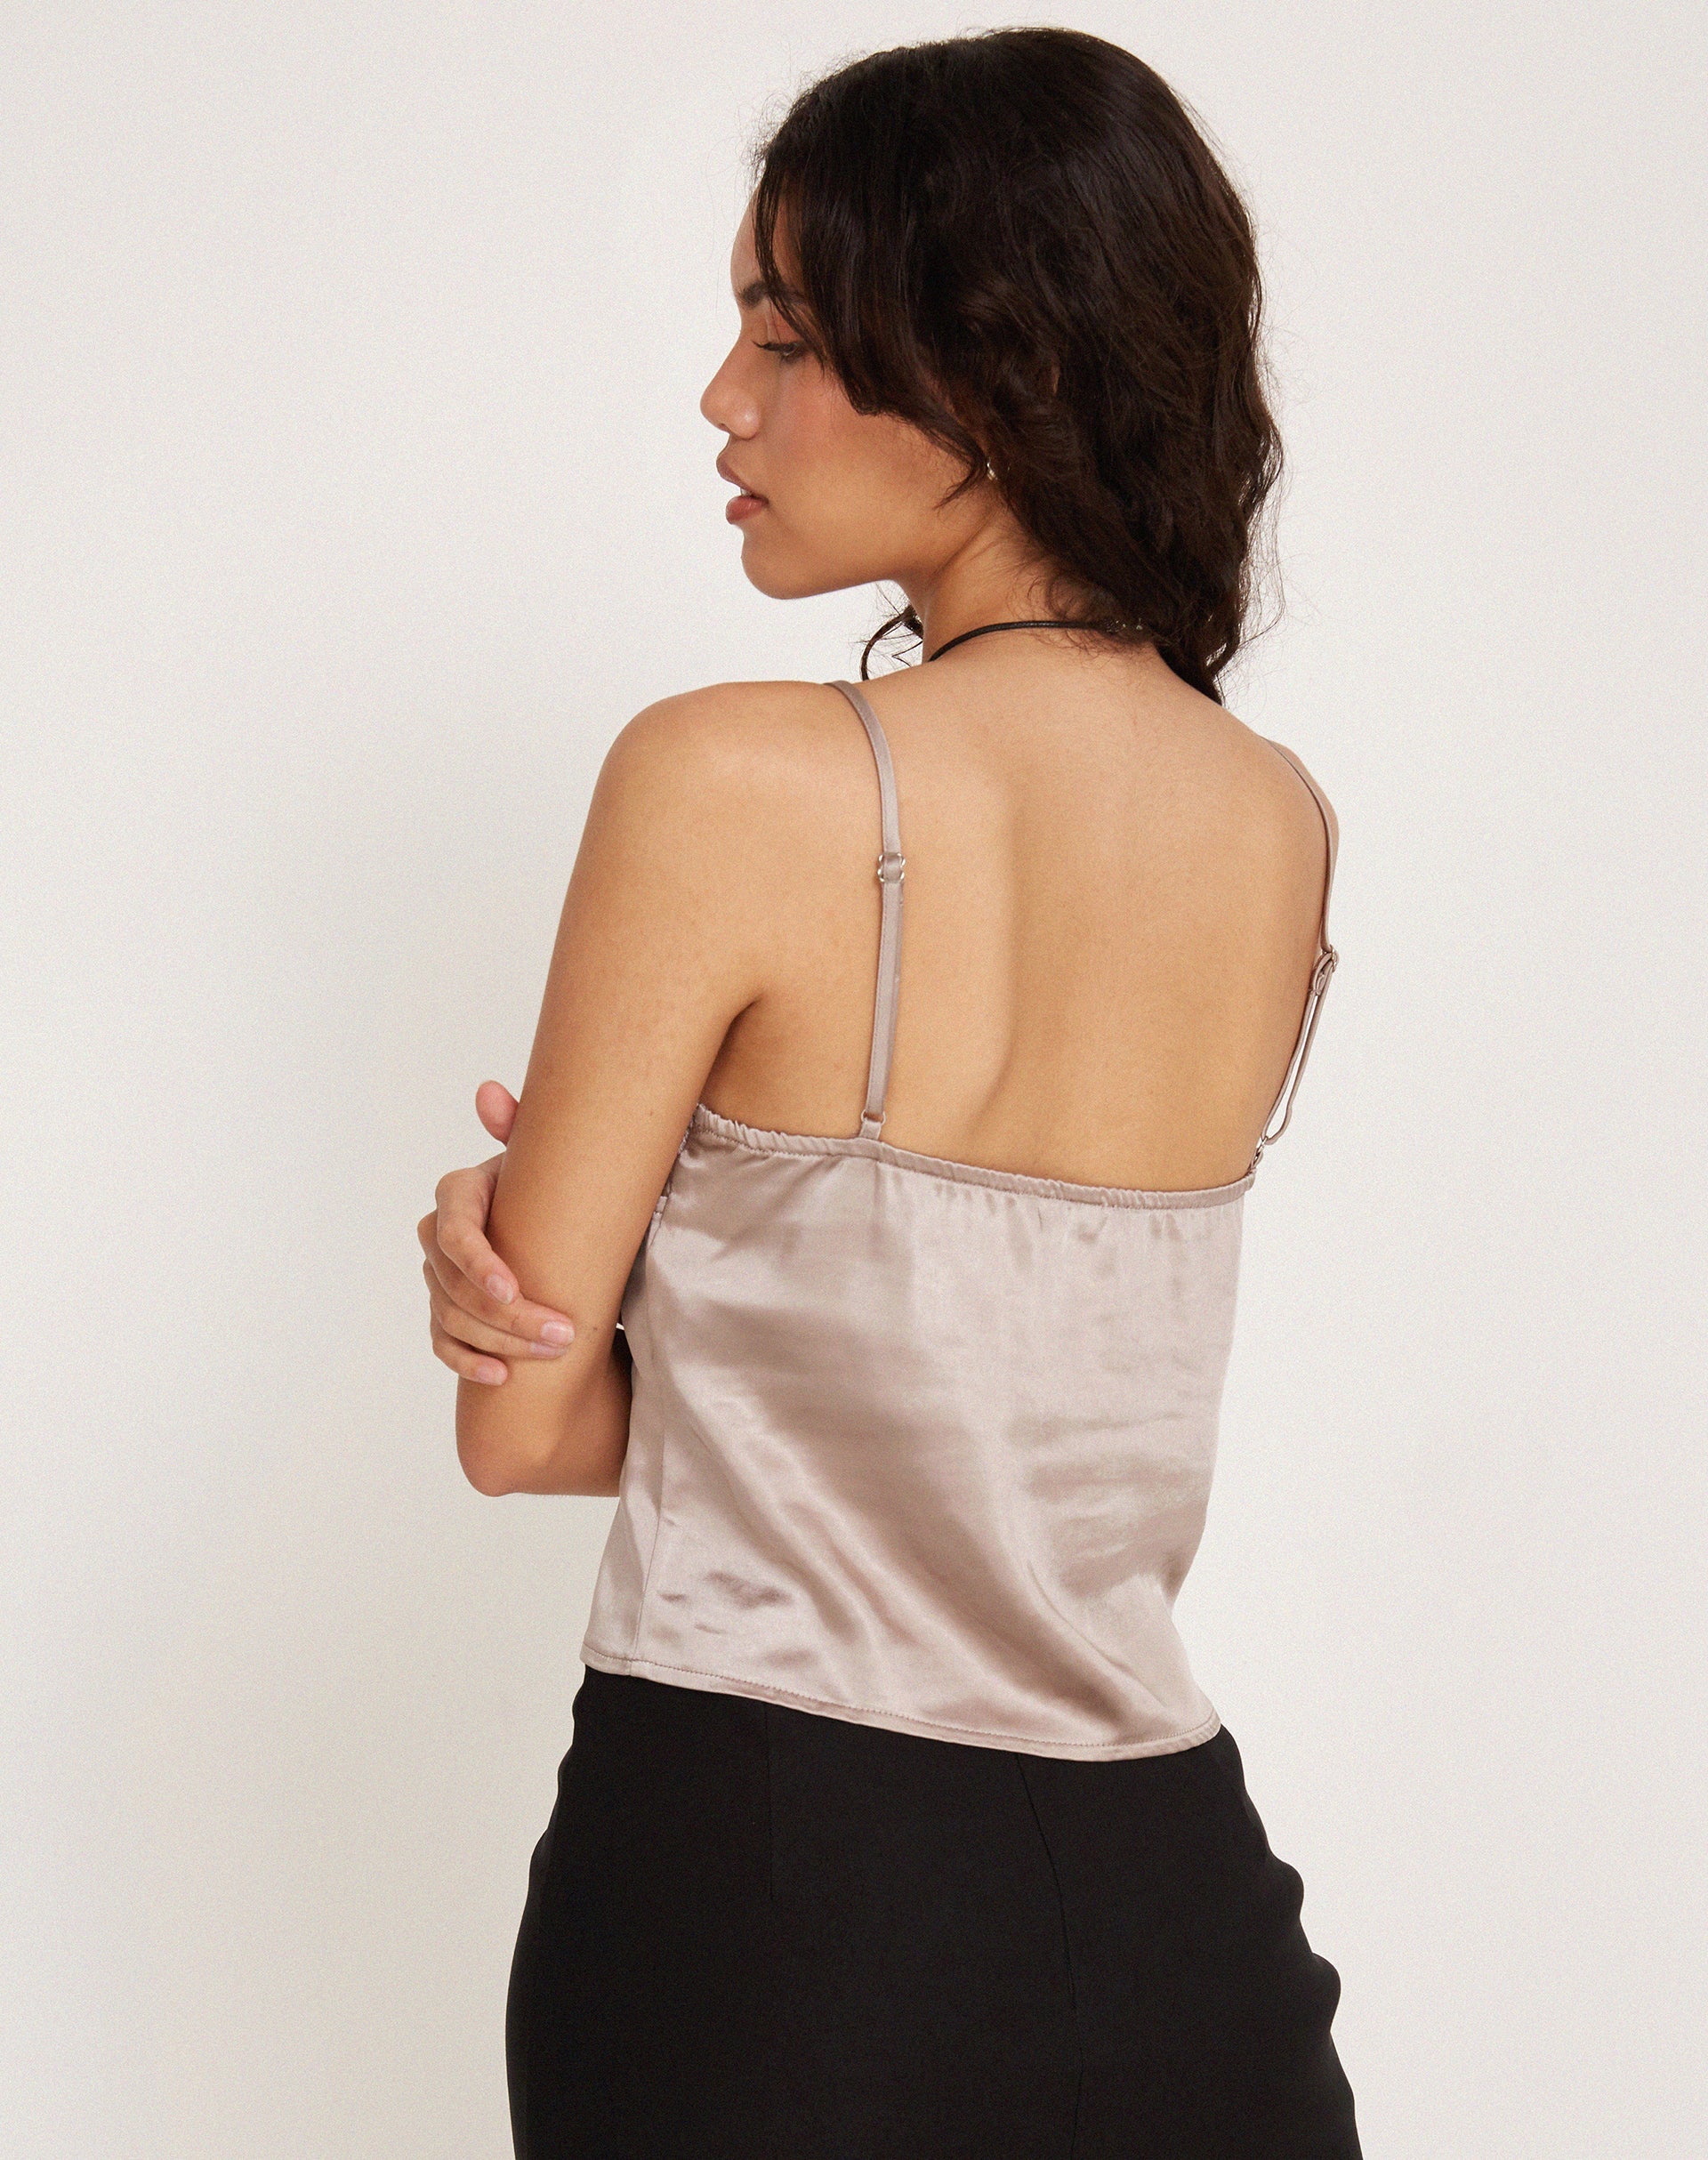 Melly Chiffon Cami Top in Dessert Sand